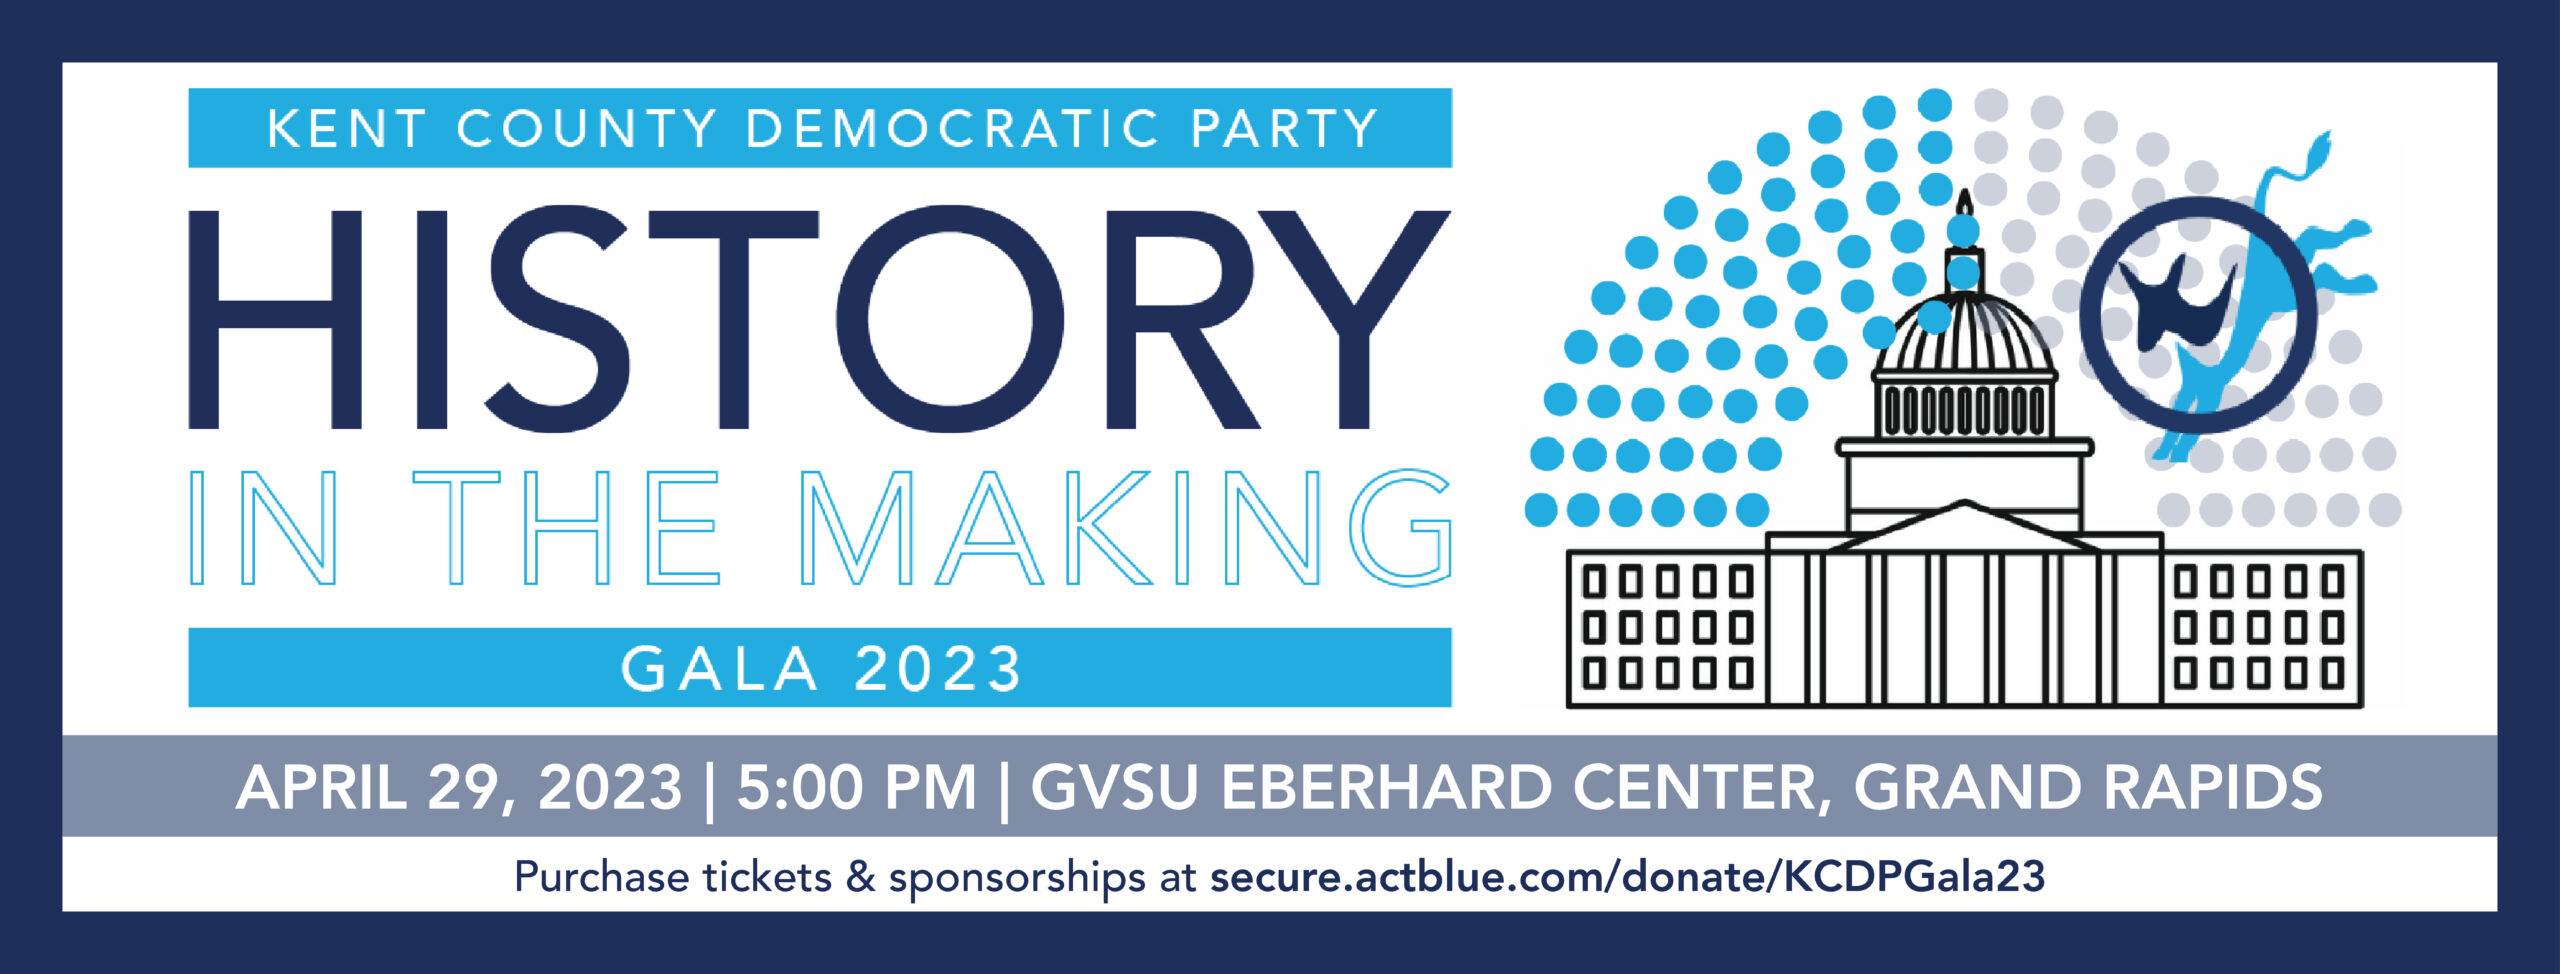 Kent County Democratic Party - History in the making - Gala 2023 - April 29, 2023, 5:00 PM, GVSU Eberhard Center, Grand Rapids - Purchase tickets & sponsorships at secure.actblue.com/donate/KCDPGala23